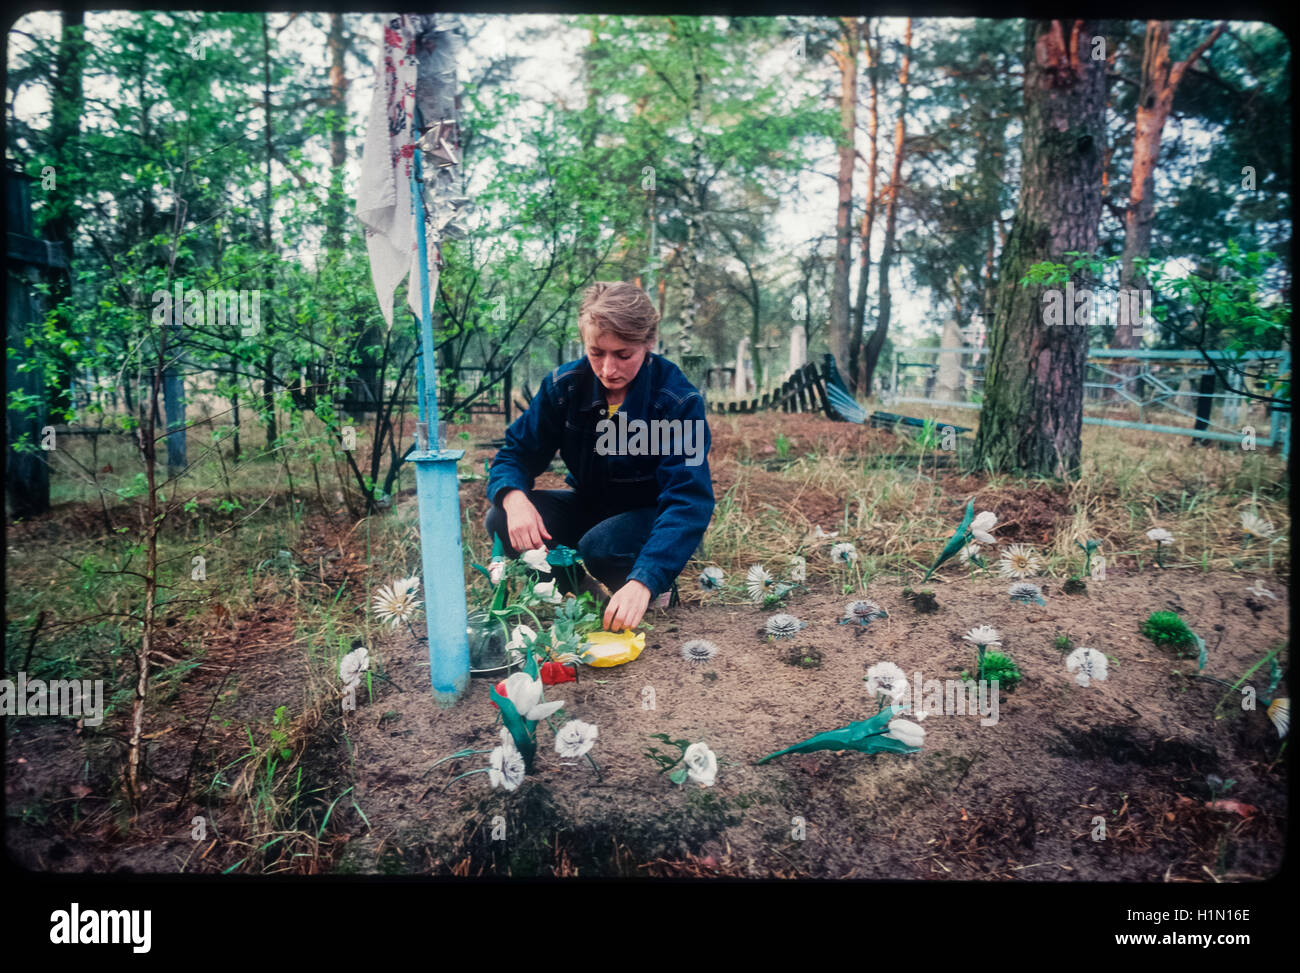 Cemetery of the village of Novy Mir, contaminated and evacuated after the Chernobyl nuclear accident, located in the zone of 30 km around the plant. Ukraine, May 1995. Stock Photo